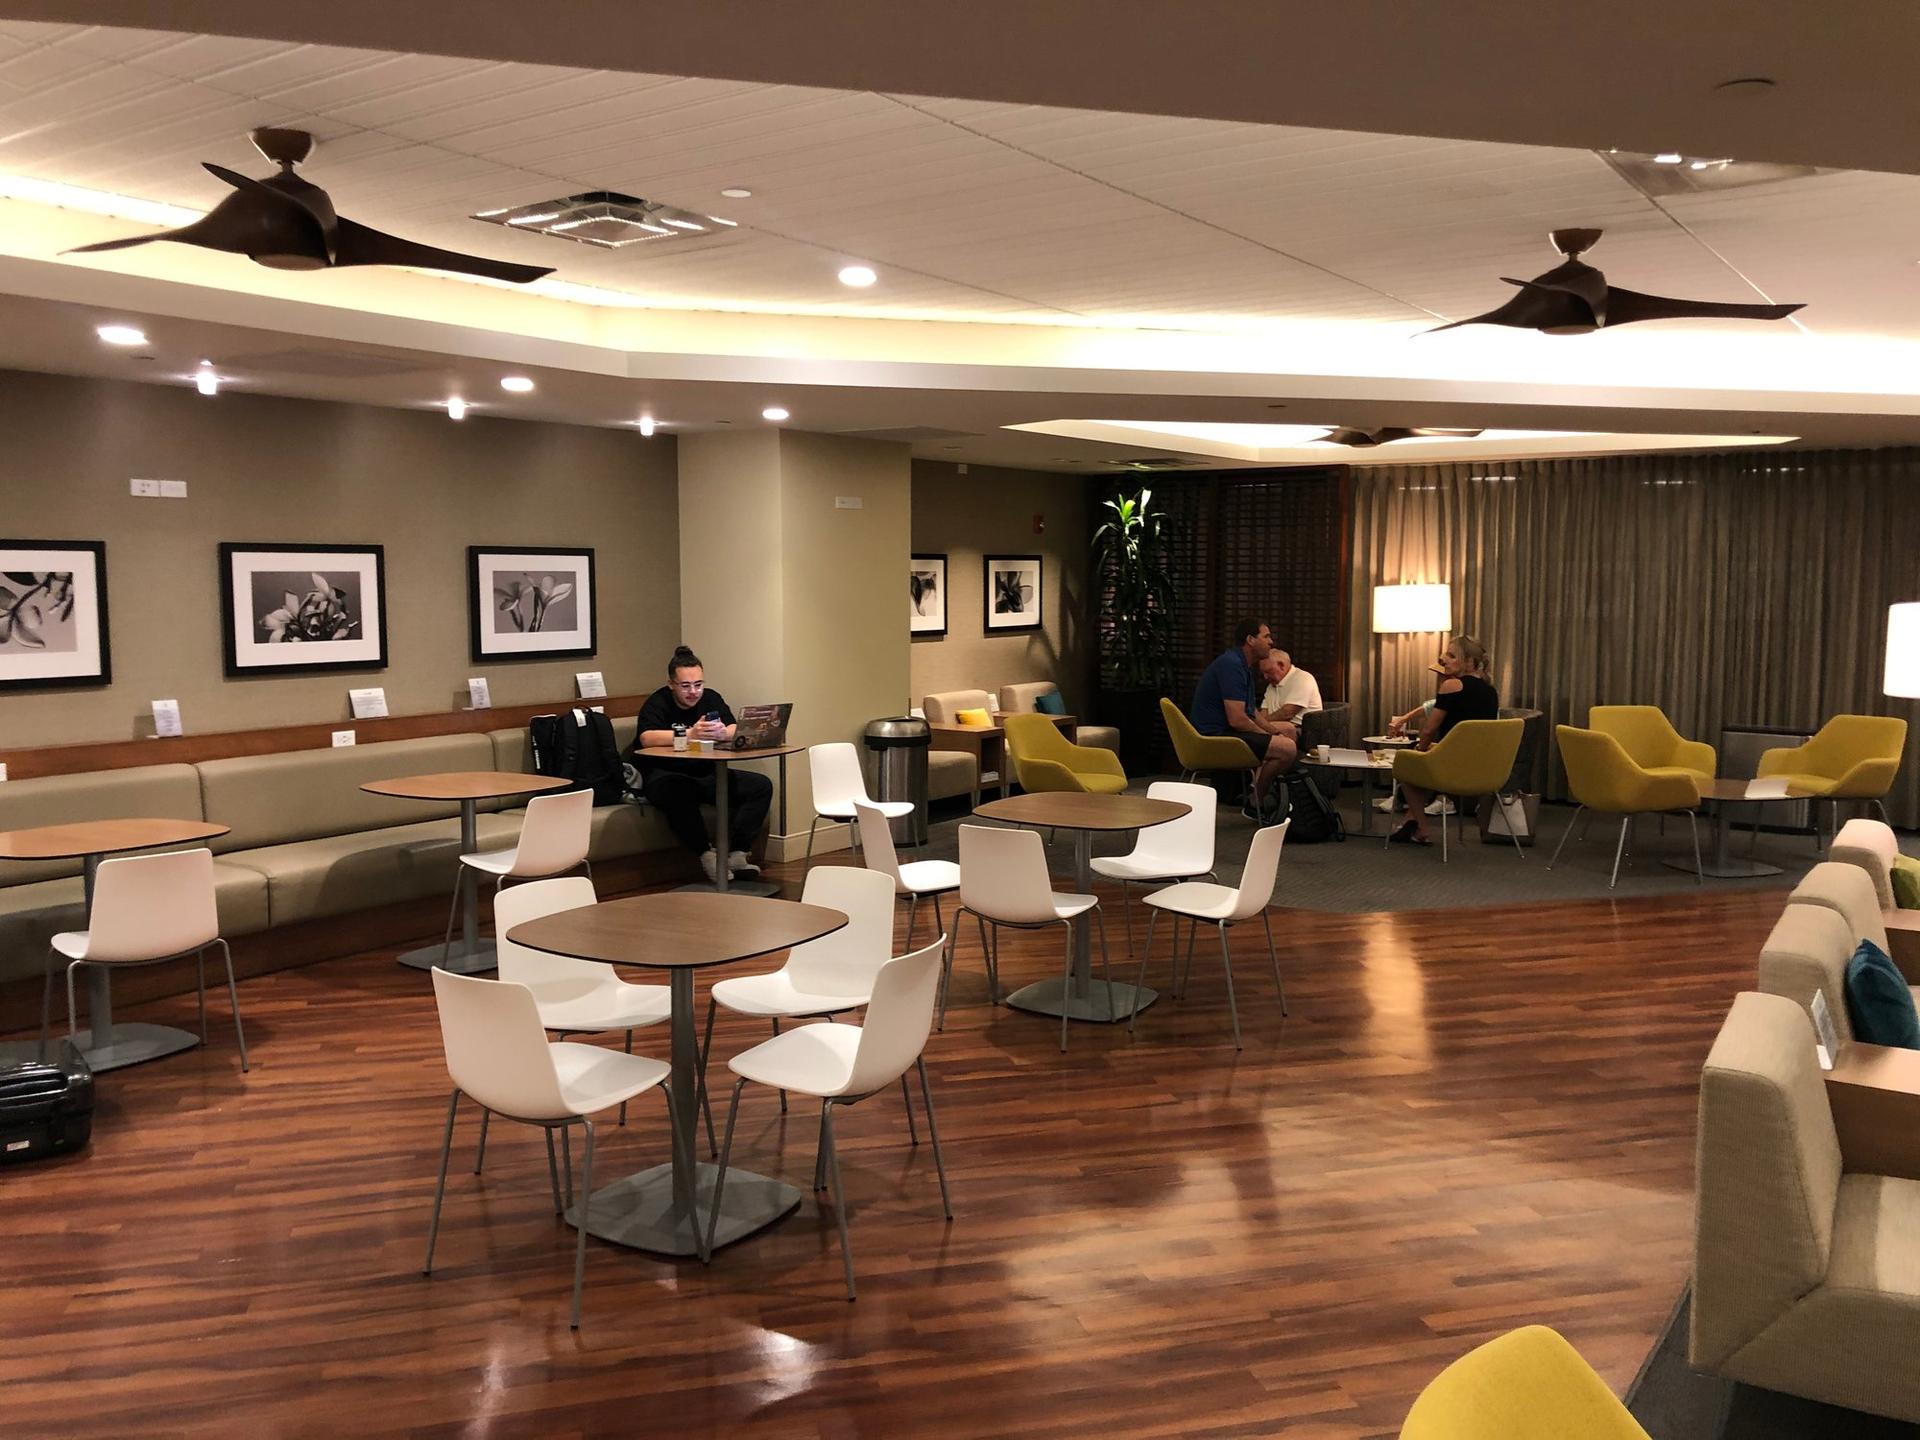 Hawaiian Airlines The Plumeria Lounge image 24 of 41